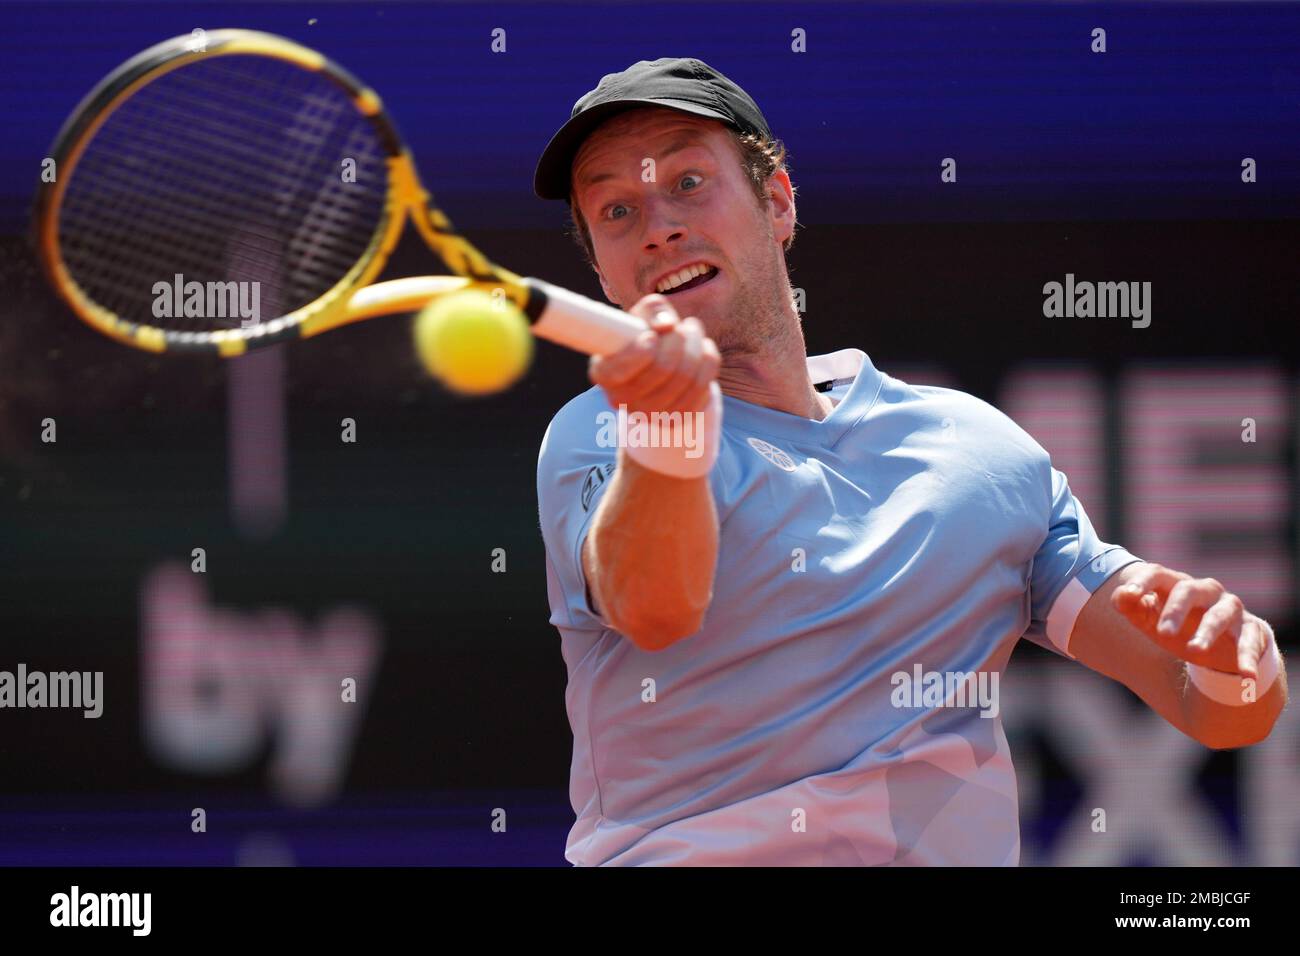 Botic Van De Zandschulp of the Netherlands returns the ball during his quarterfinal match against Casper Ruud of Norway at the Tennis ATP tournament in Munich, Germany, Friday, April 29, 2022